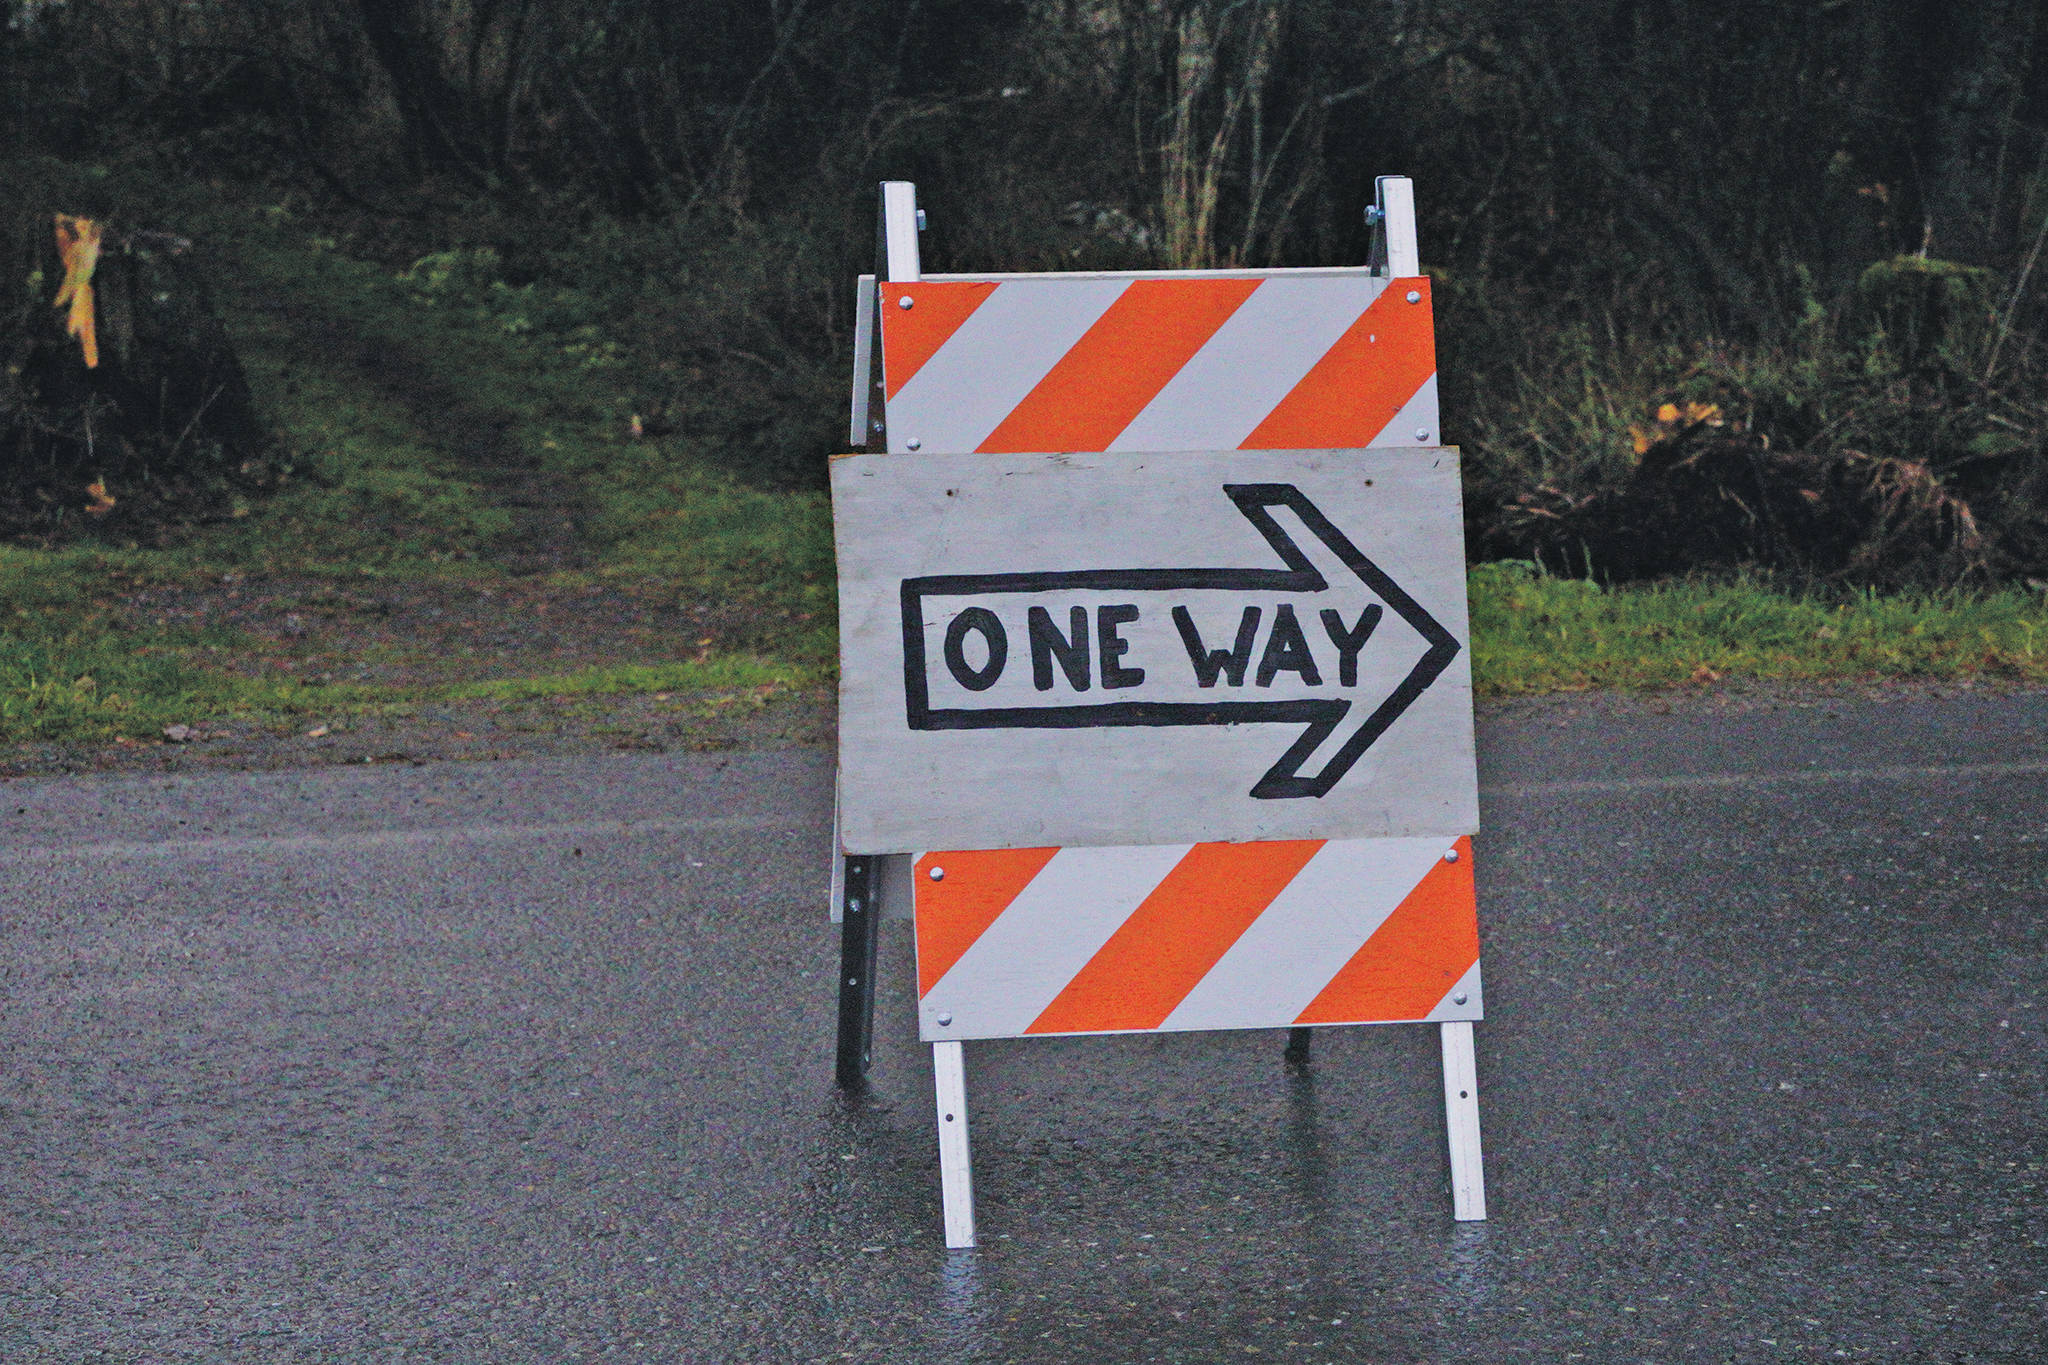 A one-way sign directs traffic on Bayview Avenue for Halloween on Oct. 31, 2019, in Homer, Alaska. To make trick-or-treating safer, Bayview and Mountainview Avenues were closed to one-way traffic from 5-8 p.m. (Photo by Michael Armstrong/Homer News)